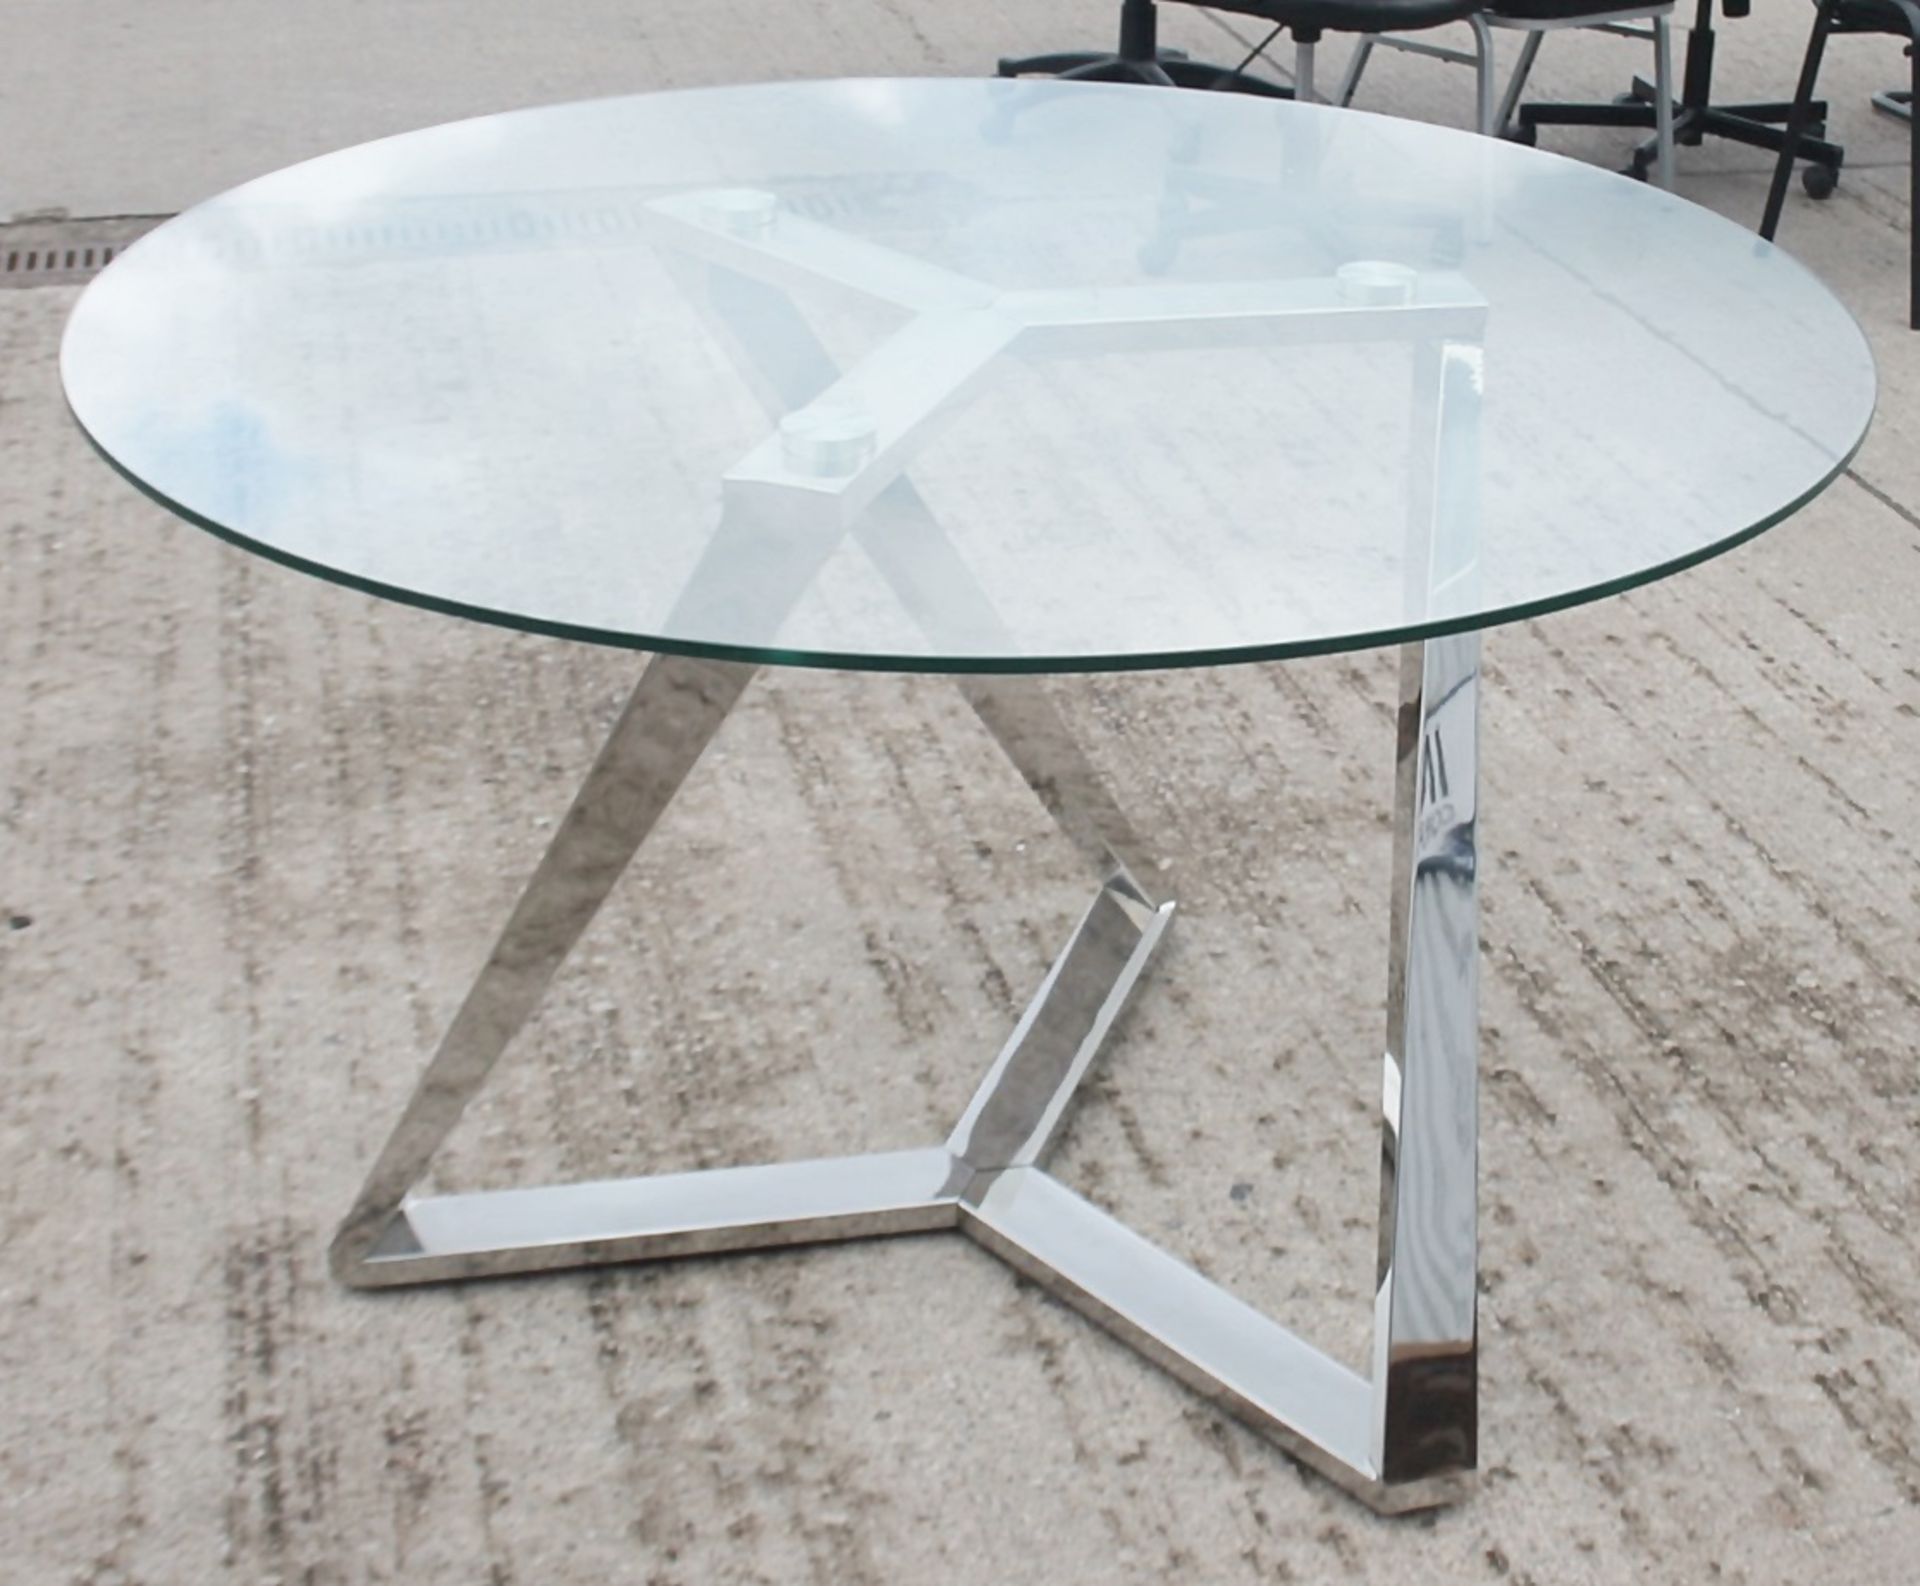 1 x Glass Topped Round Dining Tables With Angled Chrome Base - Dimensions: Ø120 x H75cm